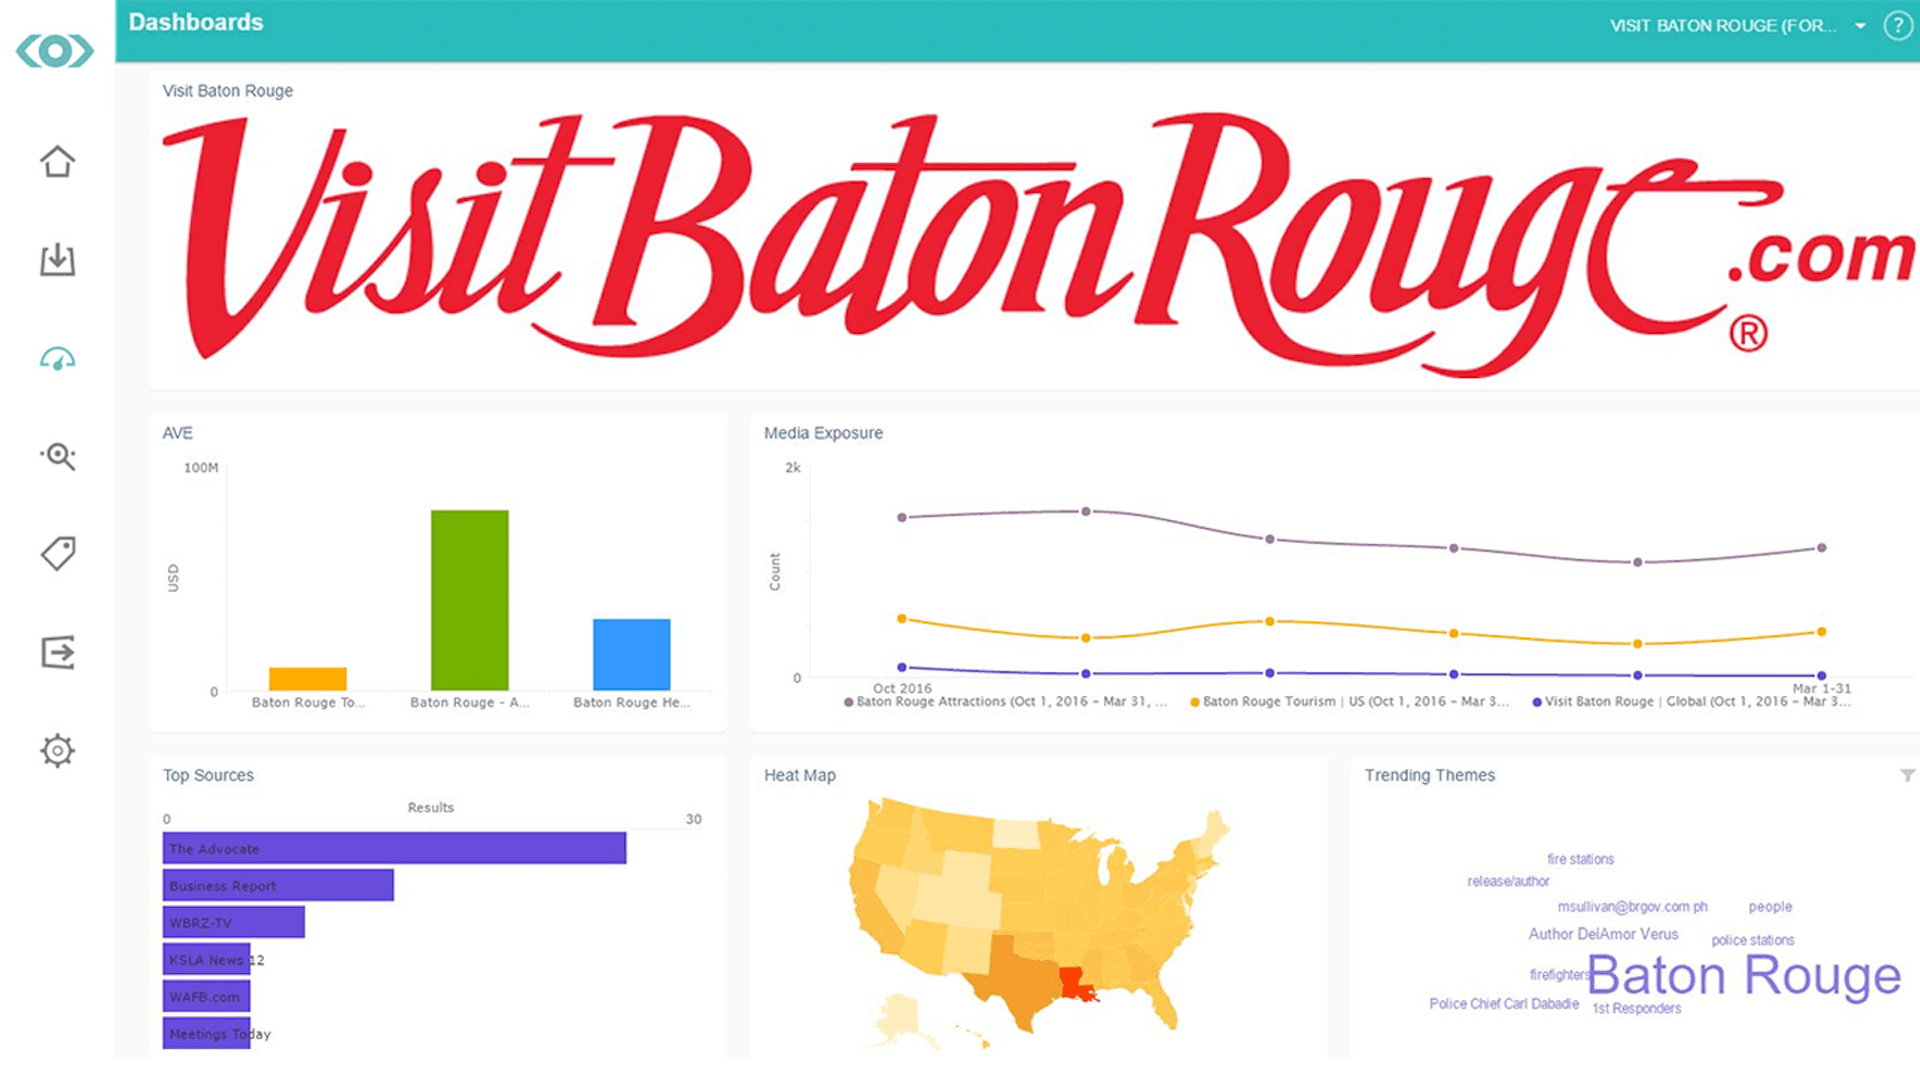 Screenshot of a Meltwater dashboard for Visit Baton Rouge.com